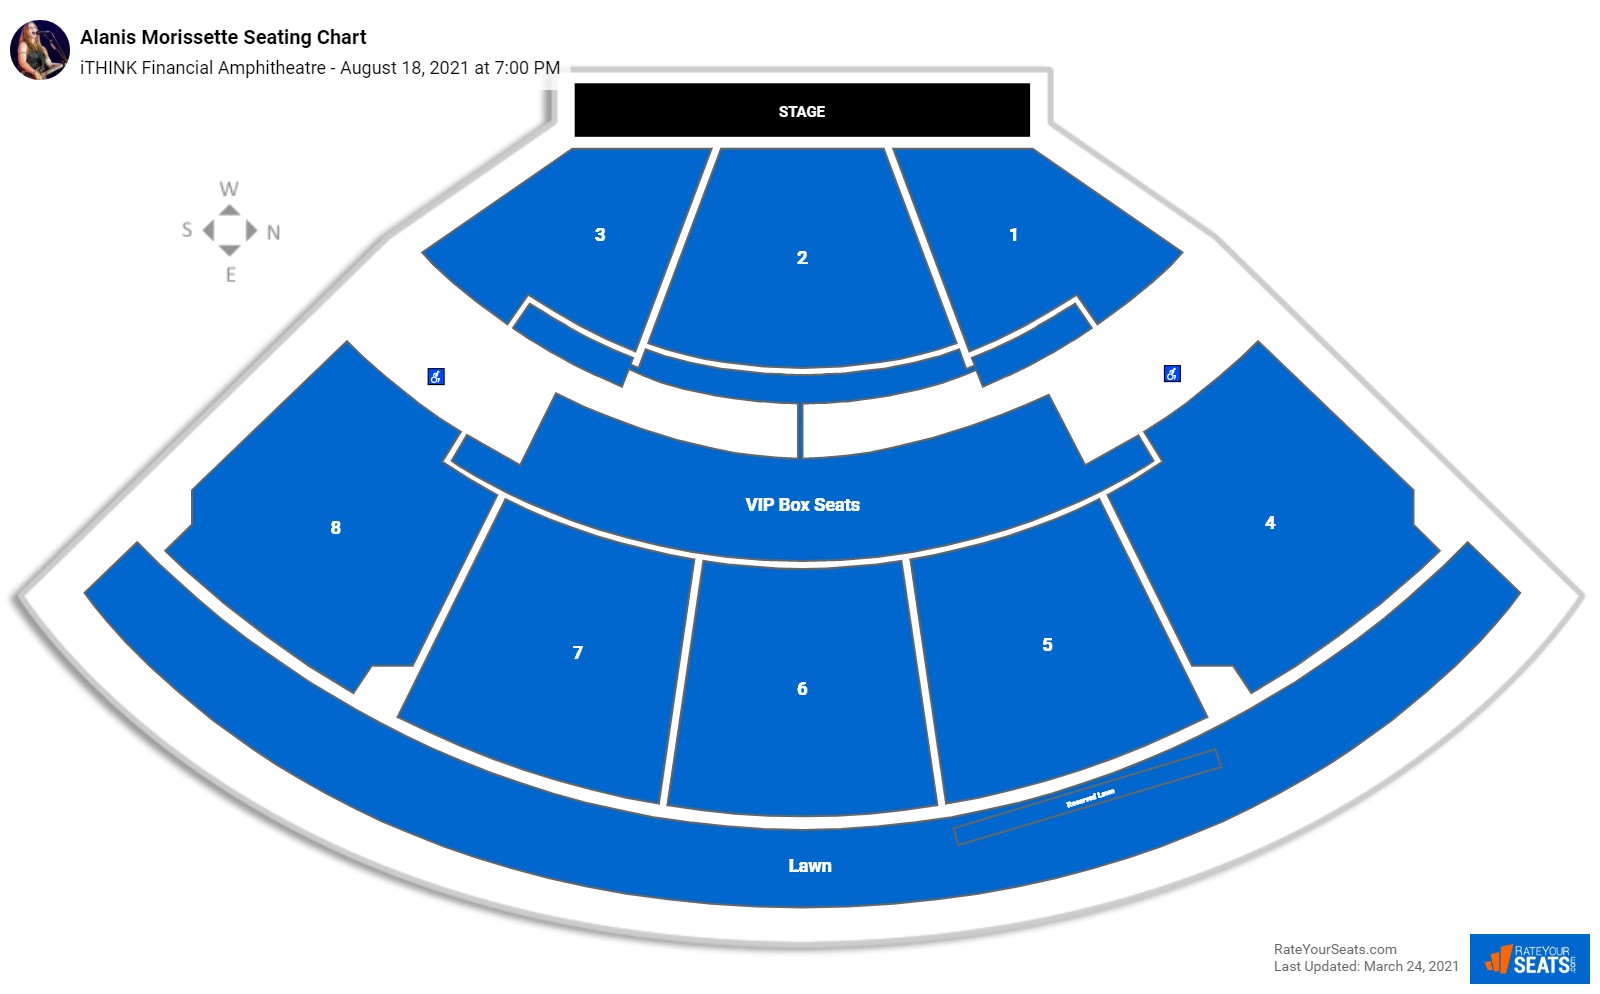 iTHINK Financial Amphitheatre Seating Chart - RateYourSeats.com